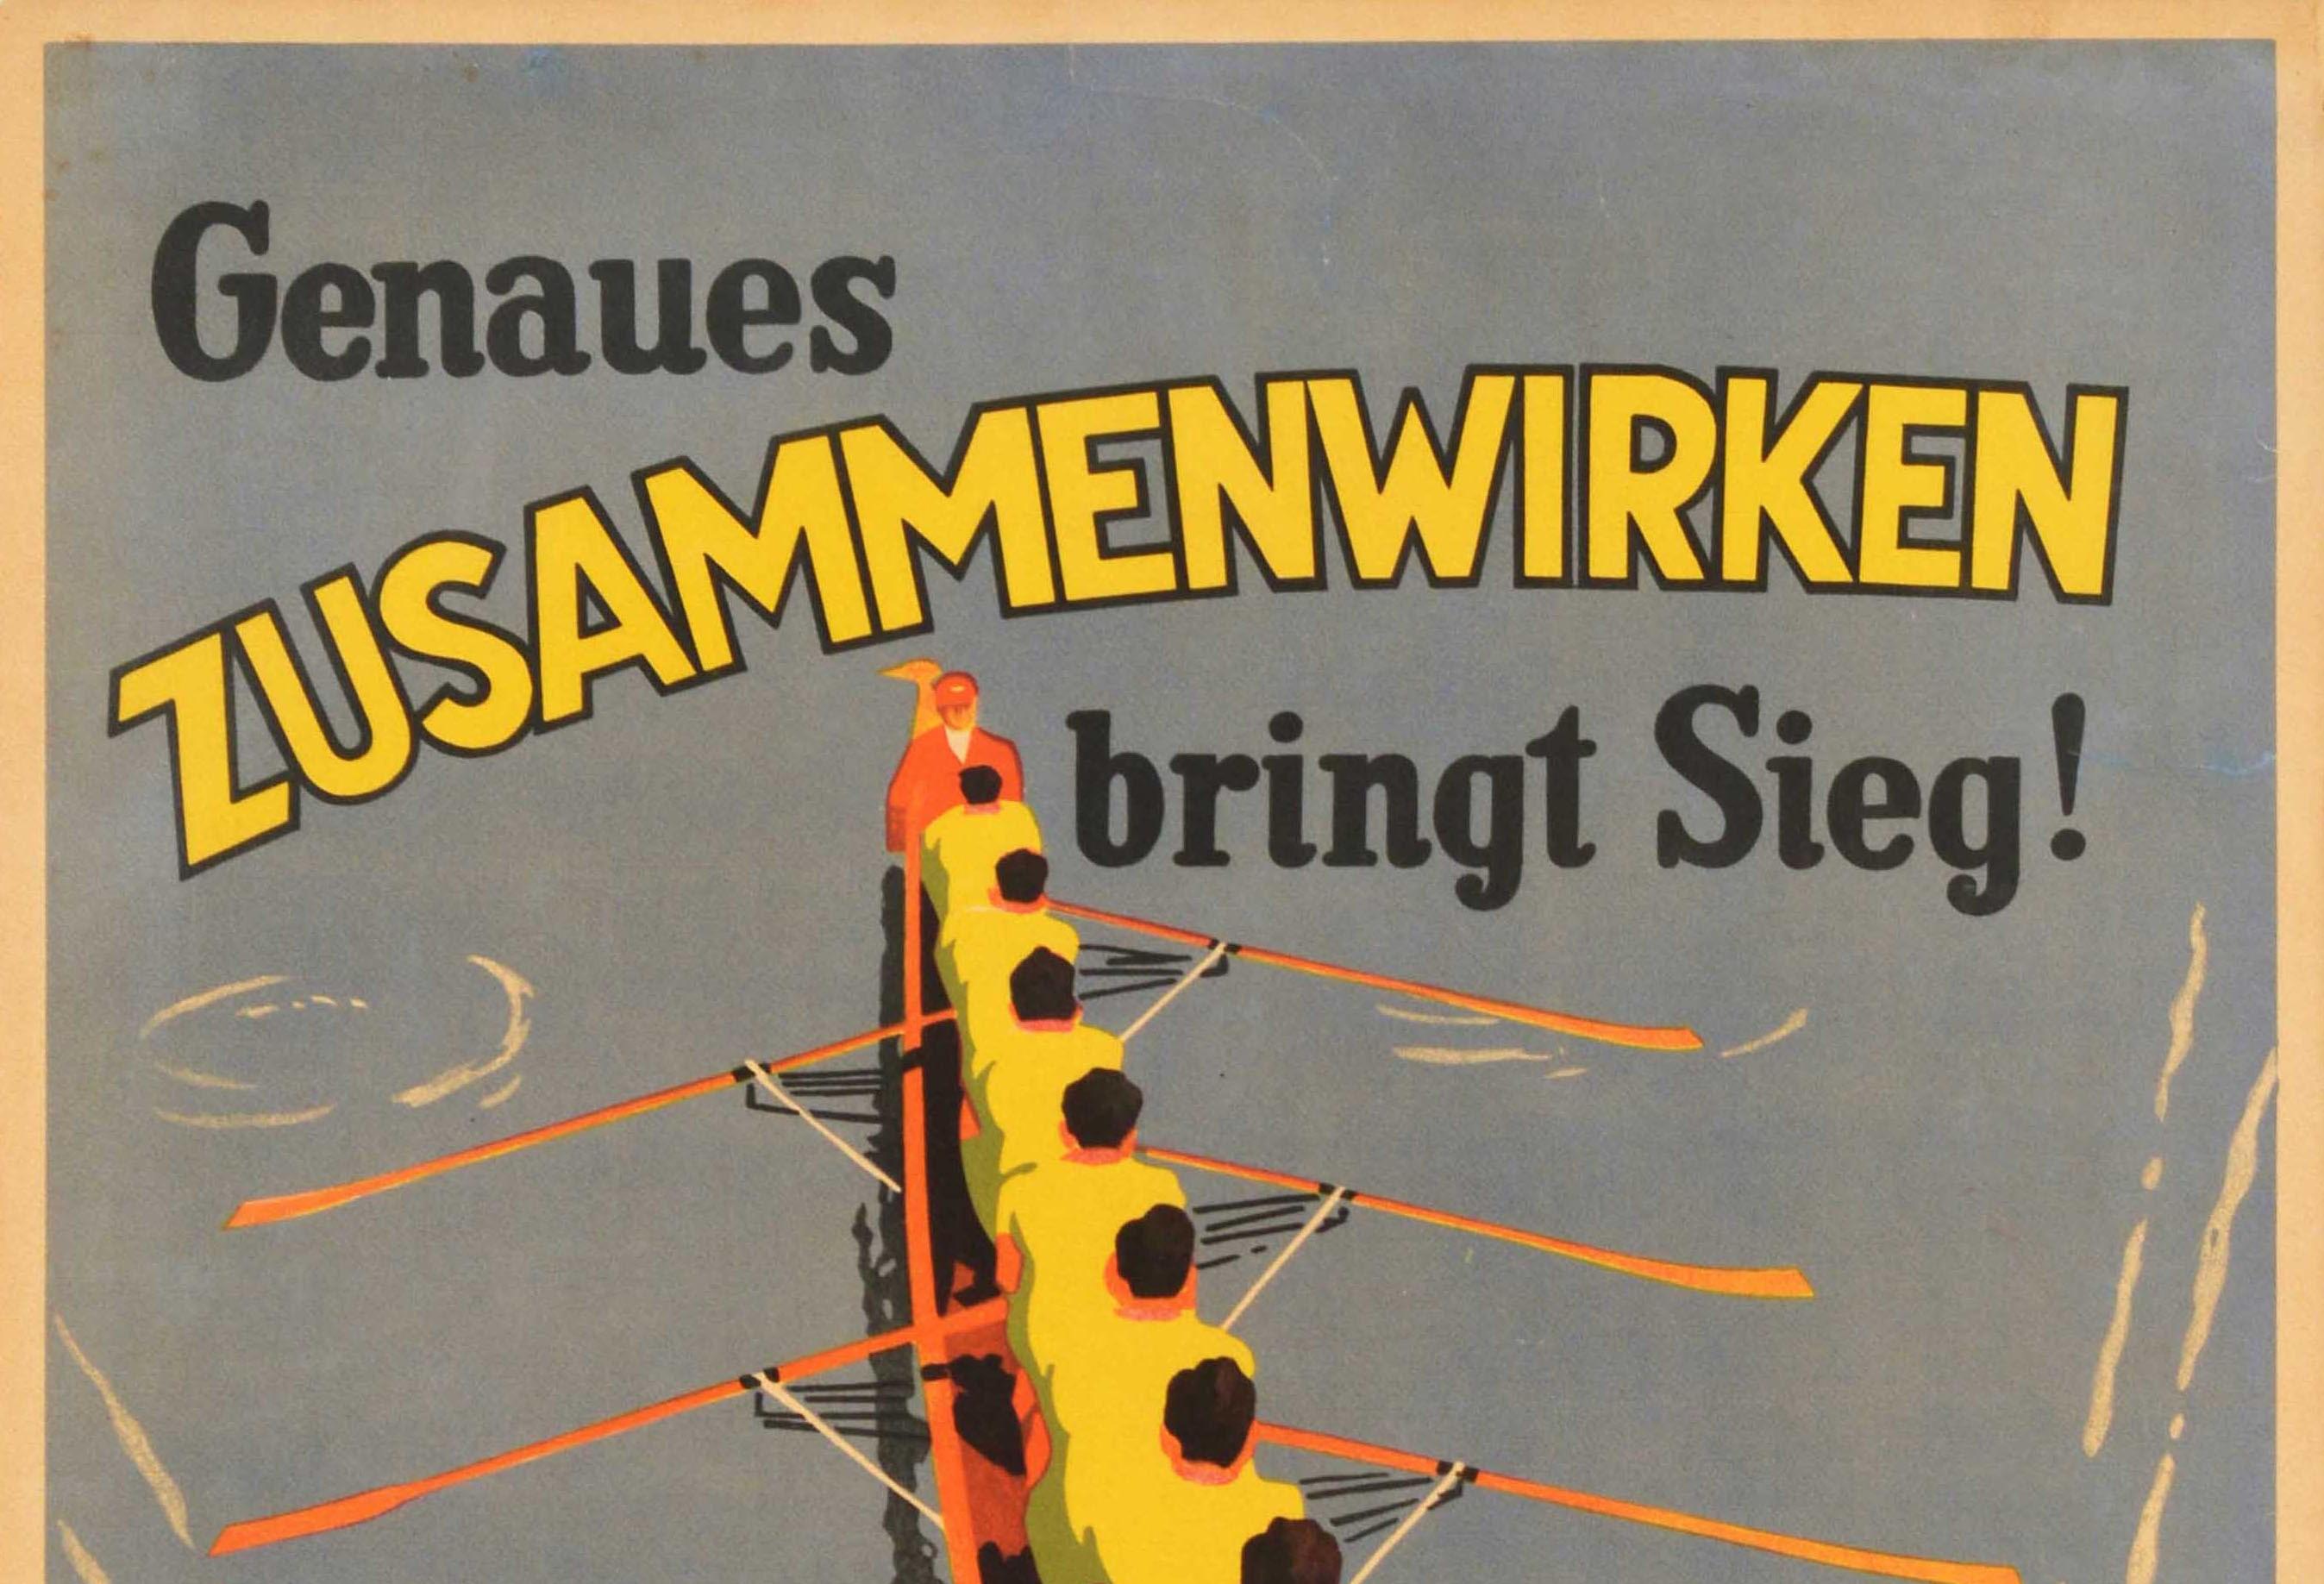 Original vintage German motivational workplace poster issued by the Parker-Holladay company in Berlin featuring a sports illustration to promote team work depicting a crew in a racing eight / octuple scull boat rowing in rhythm together on the water